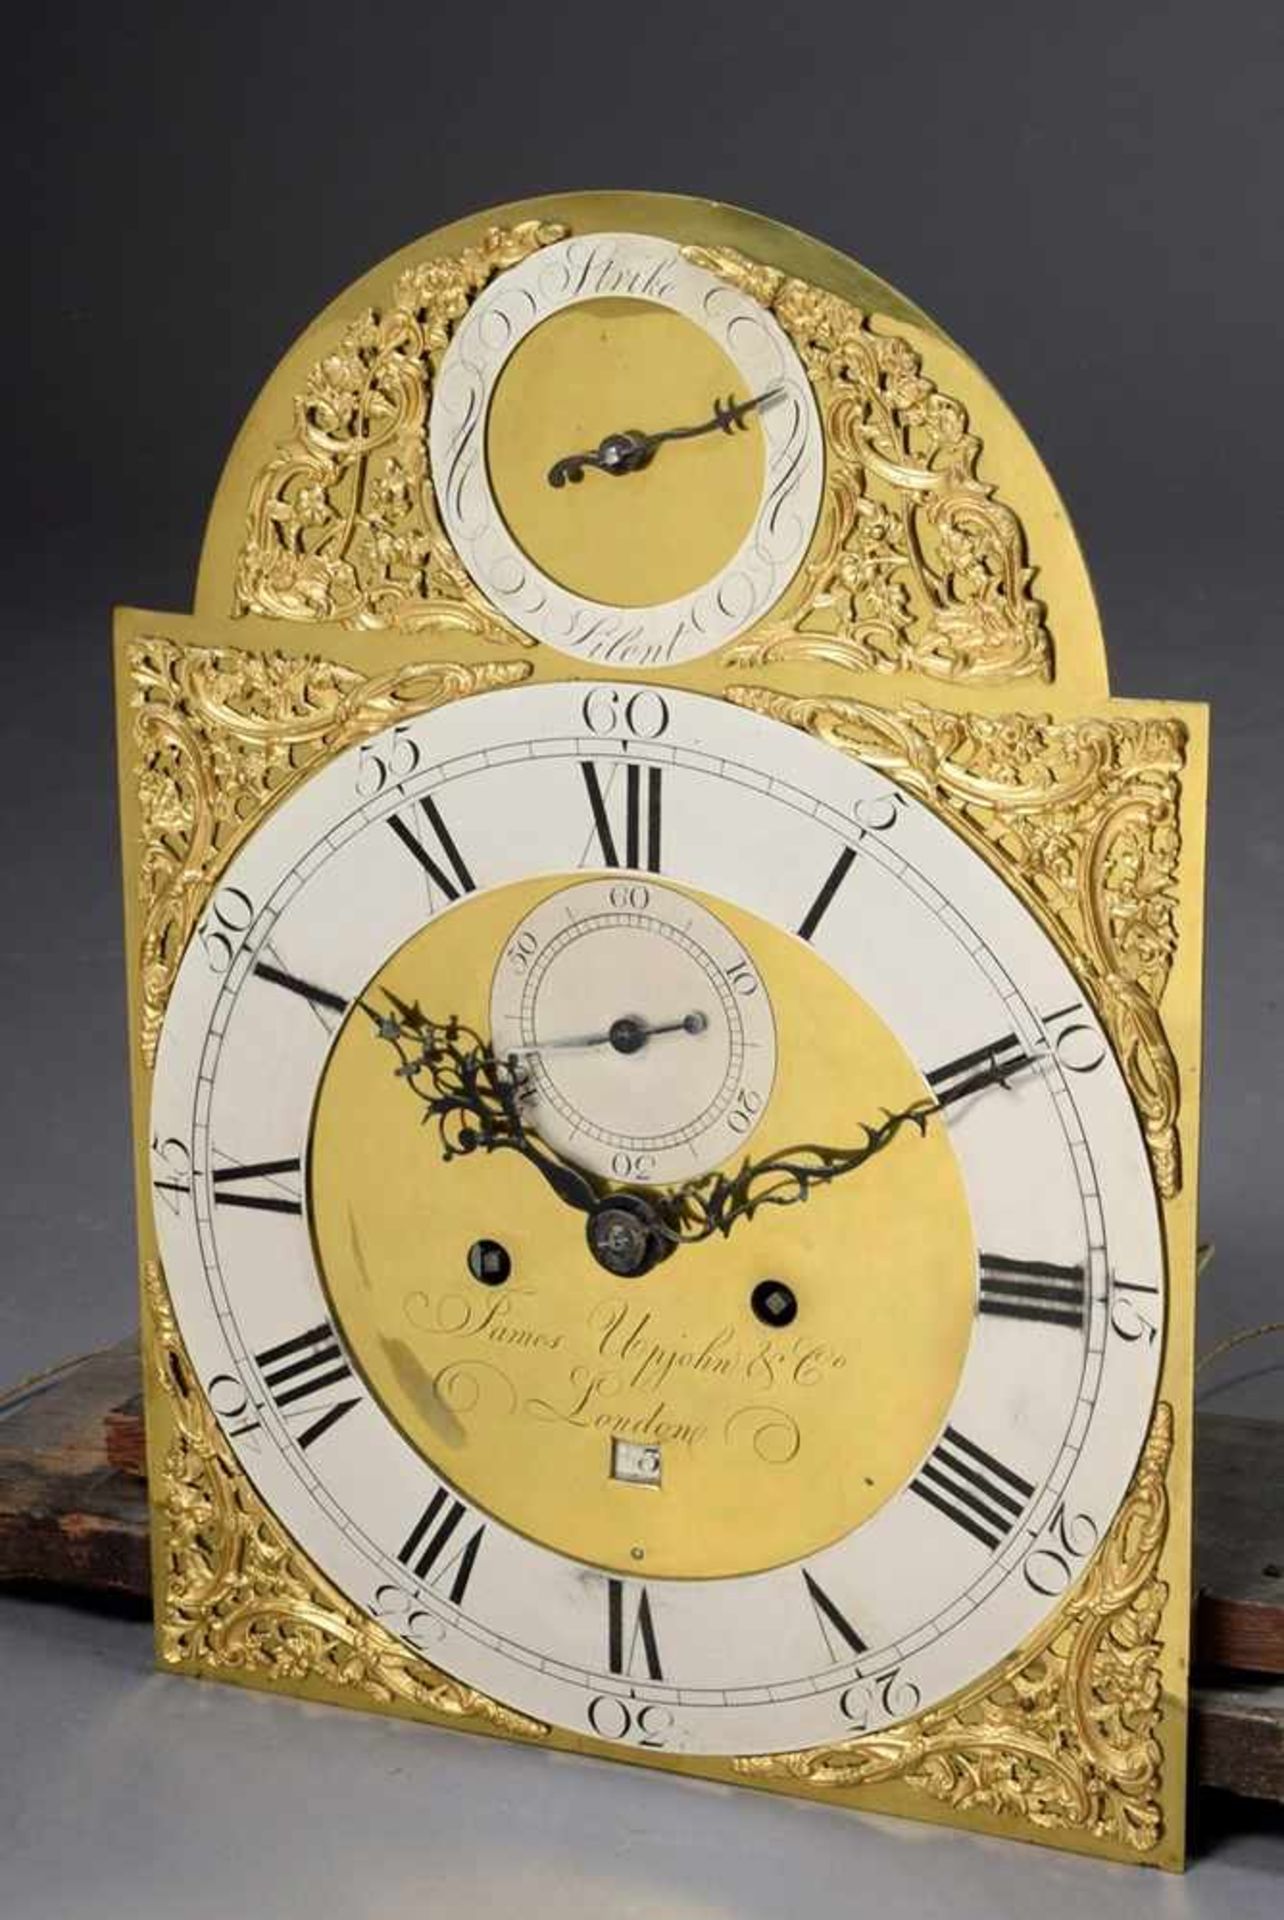 Large rococo grandfather clock with figural ivory inlays and rocaille carvings, walnut veneer, 8-day - Image 11 of 17